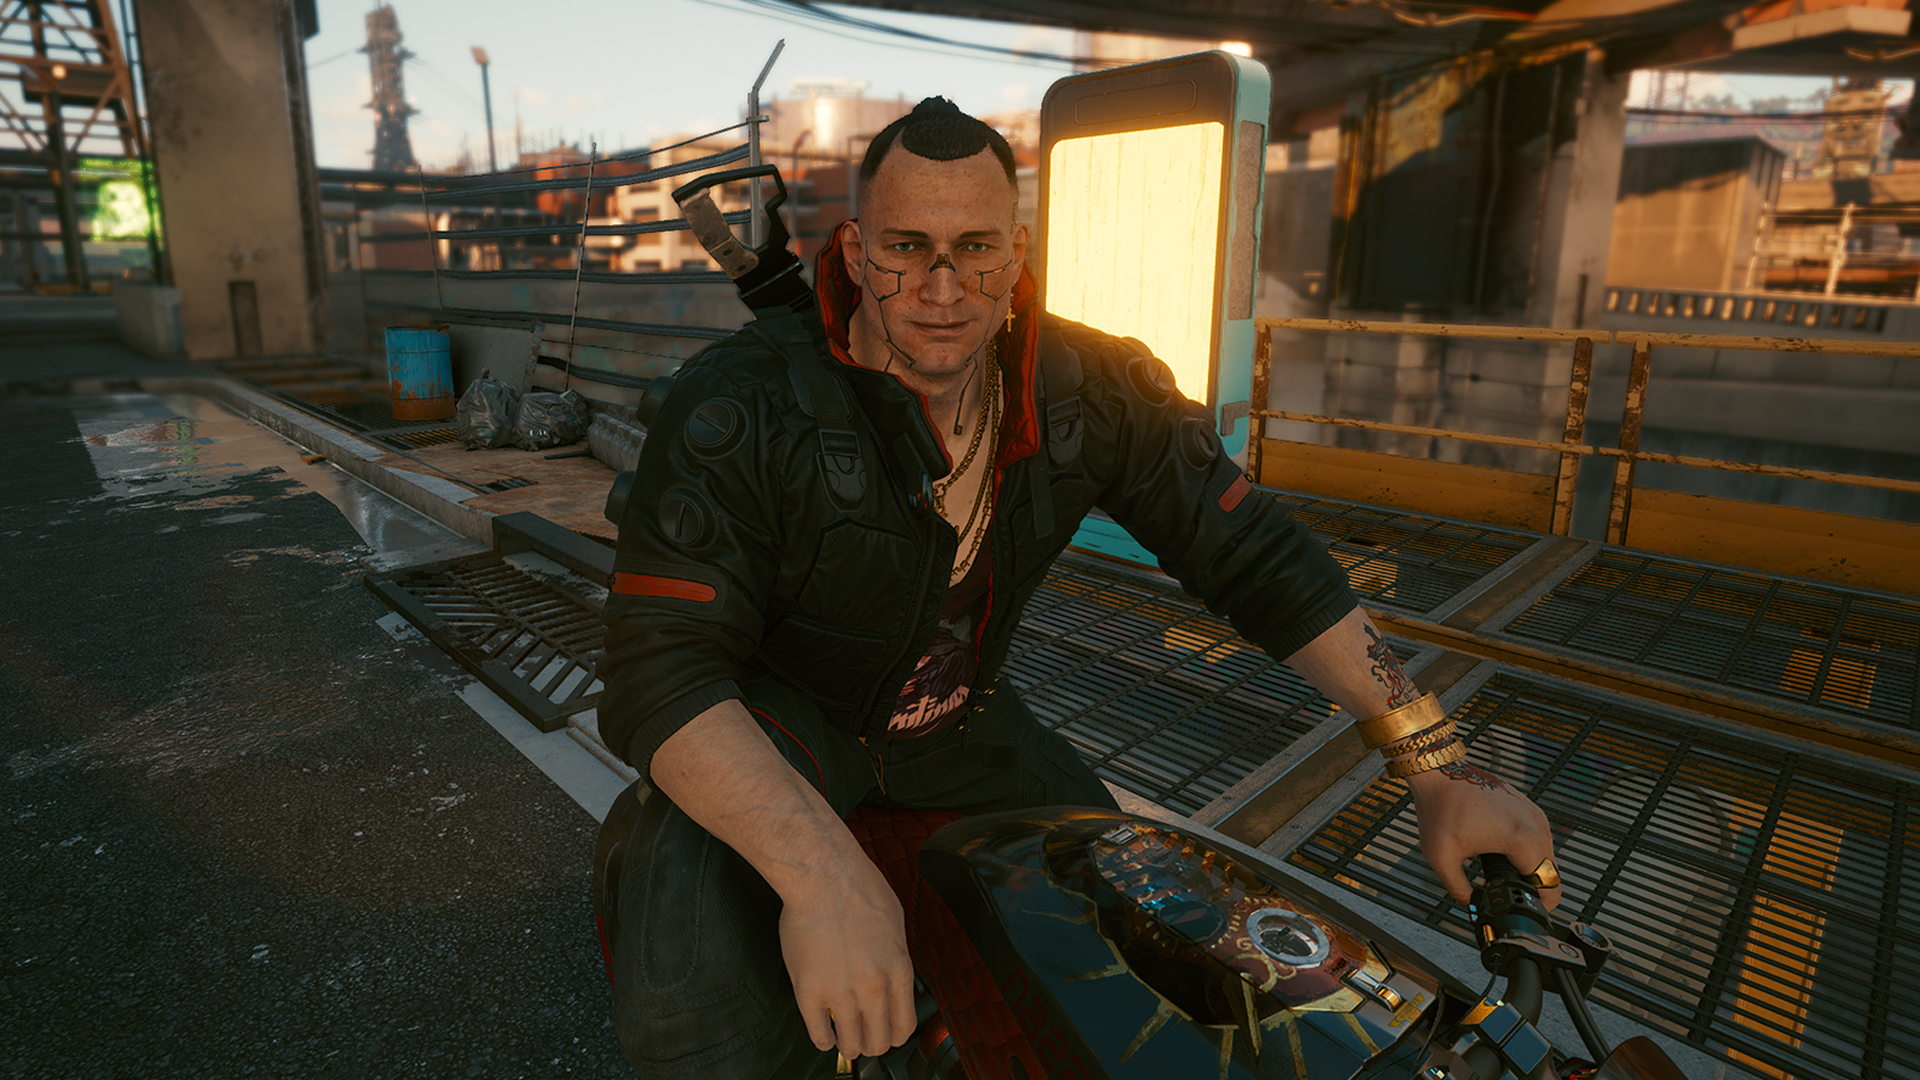 Cyberpunk 2077 Updates: CD Projekt Red Adds New Playable Characters and Vehicles to the Game